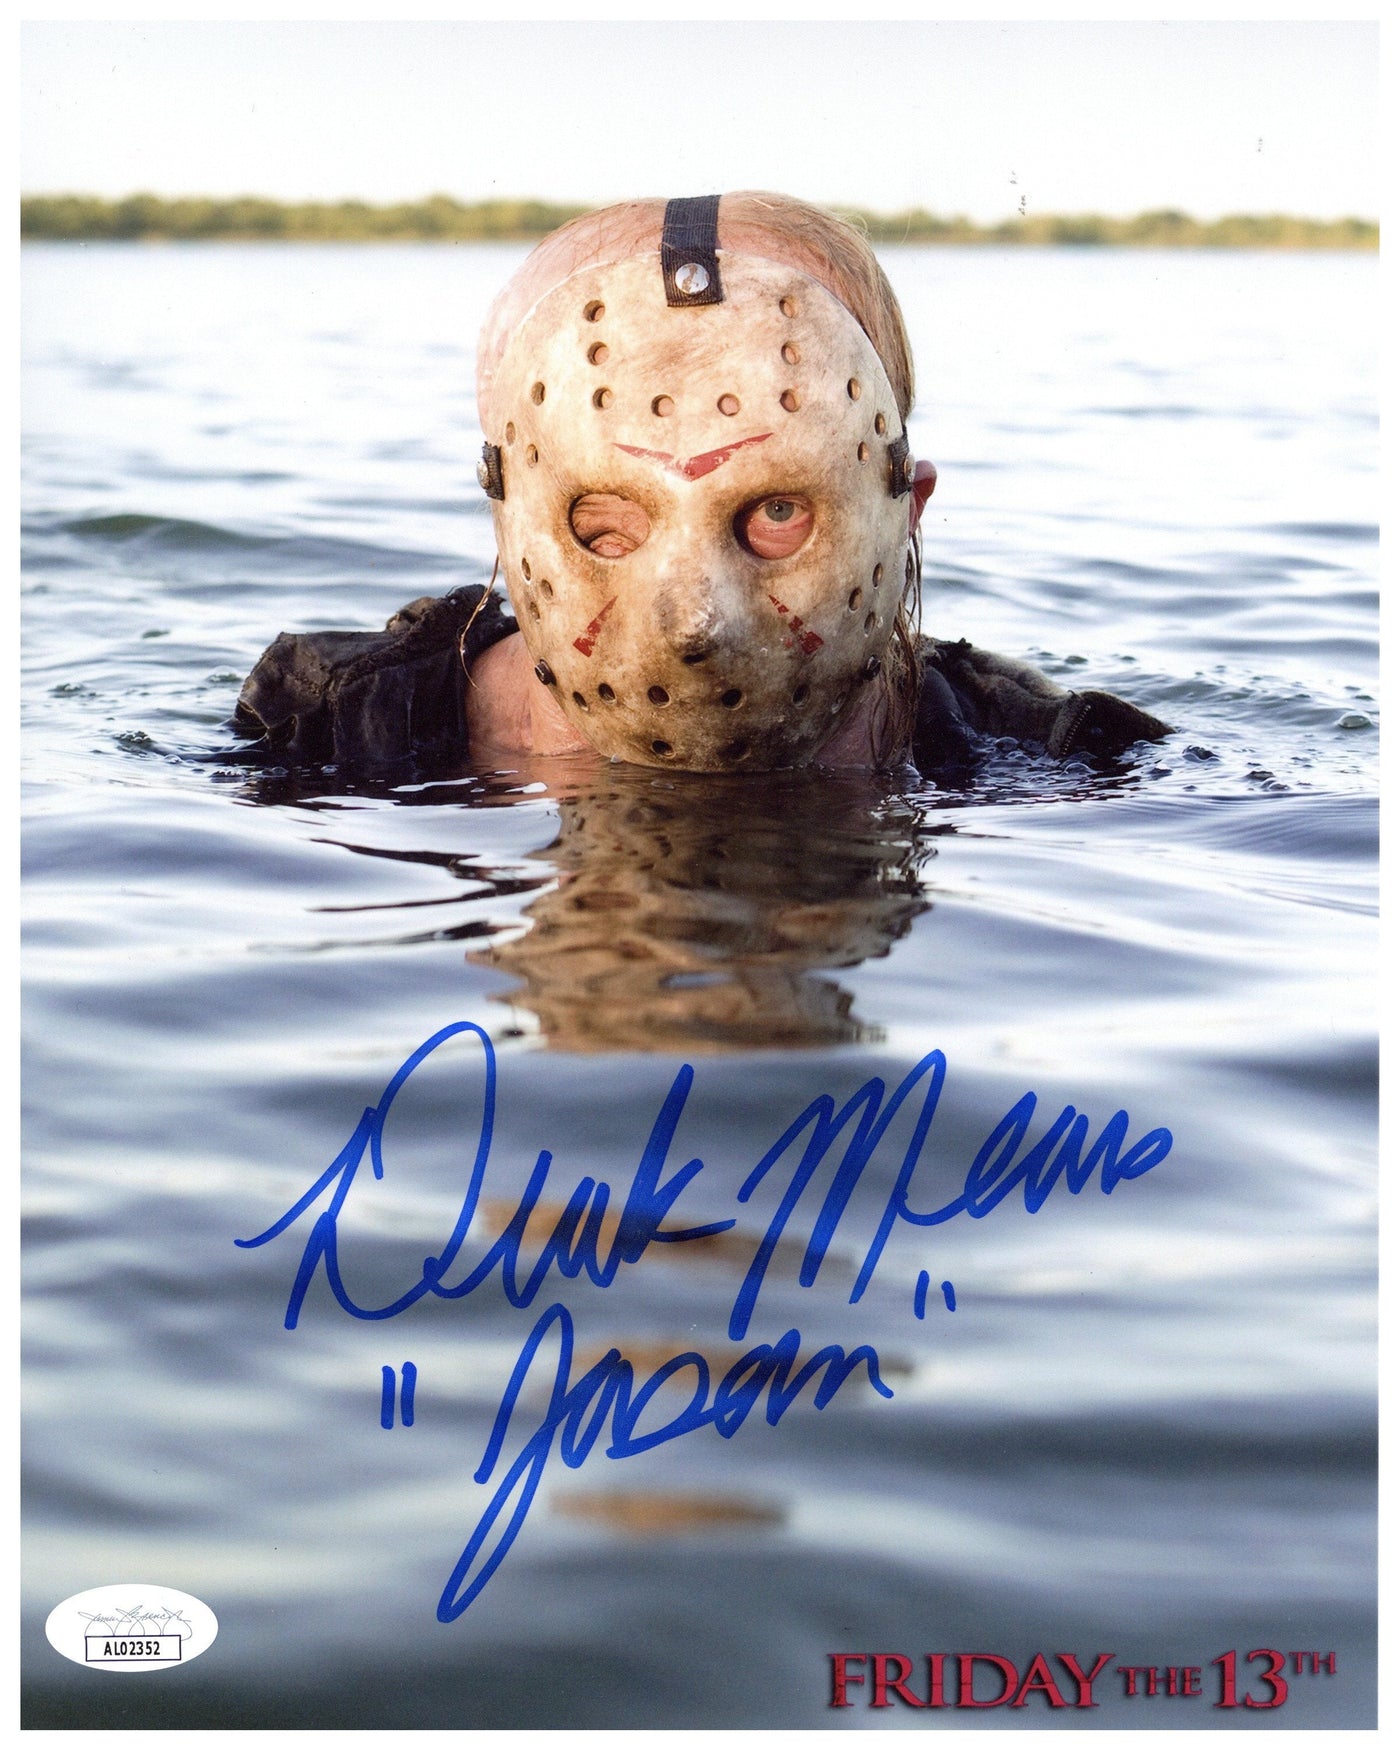 Derek Mears Signed 8x10 Photo Friday the 13th Jason Voorhees Autographed JSA COA